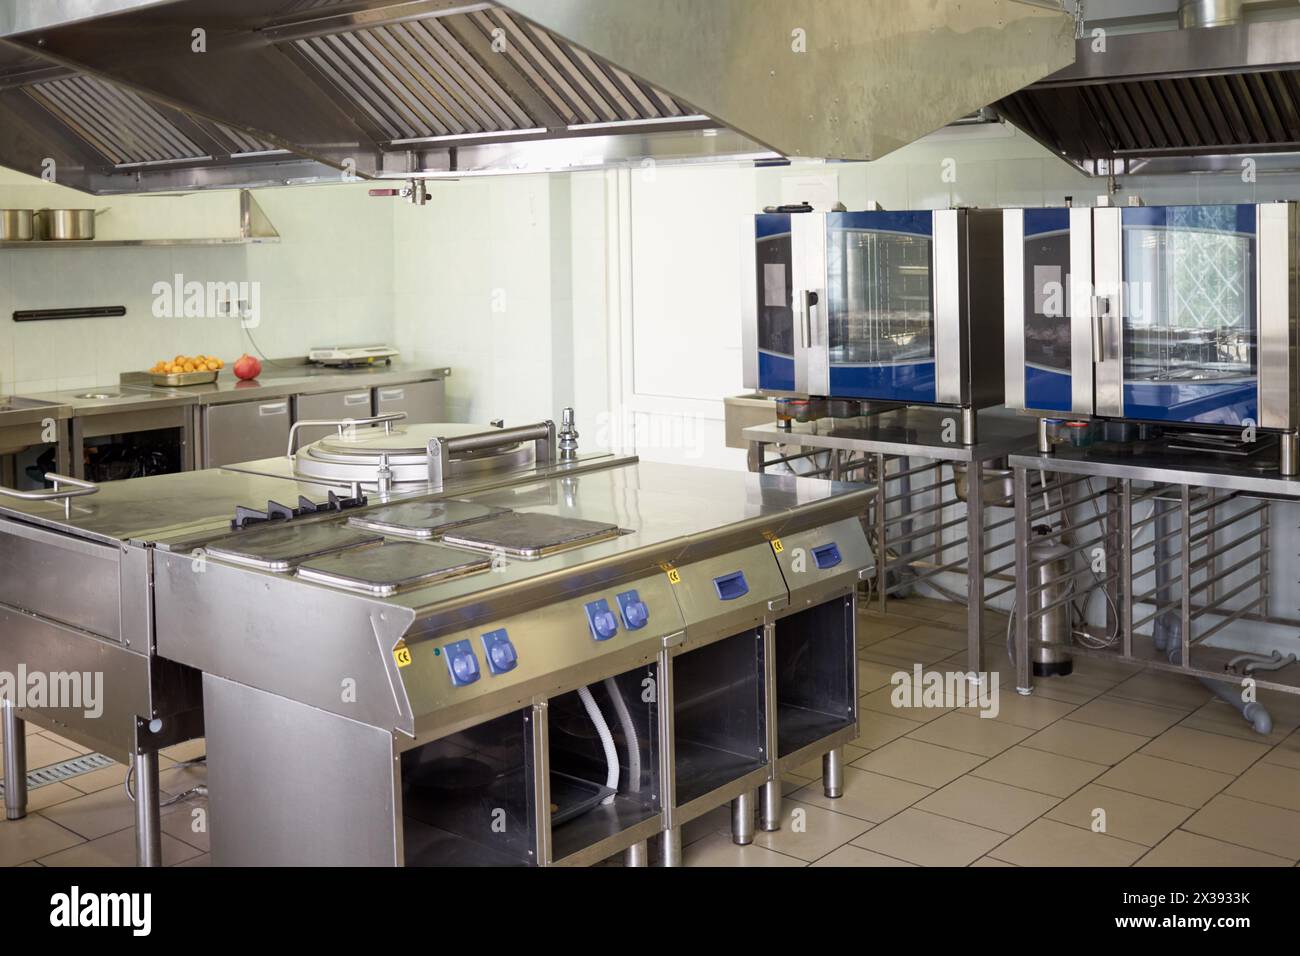 Kitchen room with stoves, sinks and refrigerators in restaurant. Stock Photo